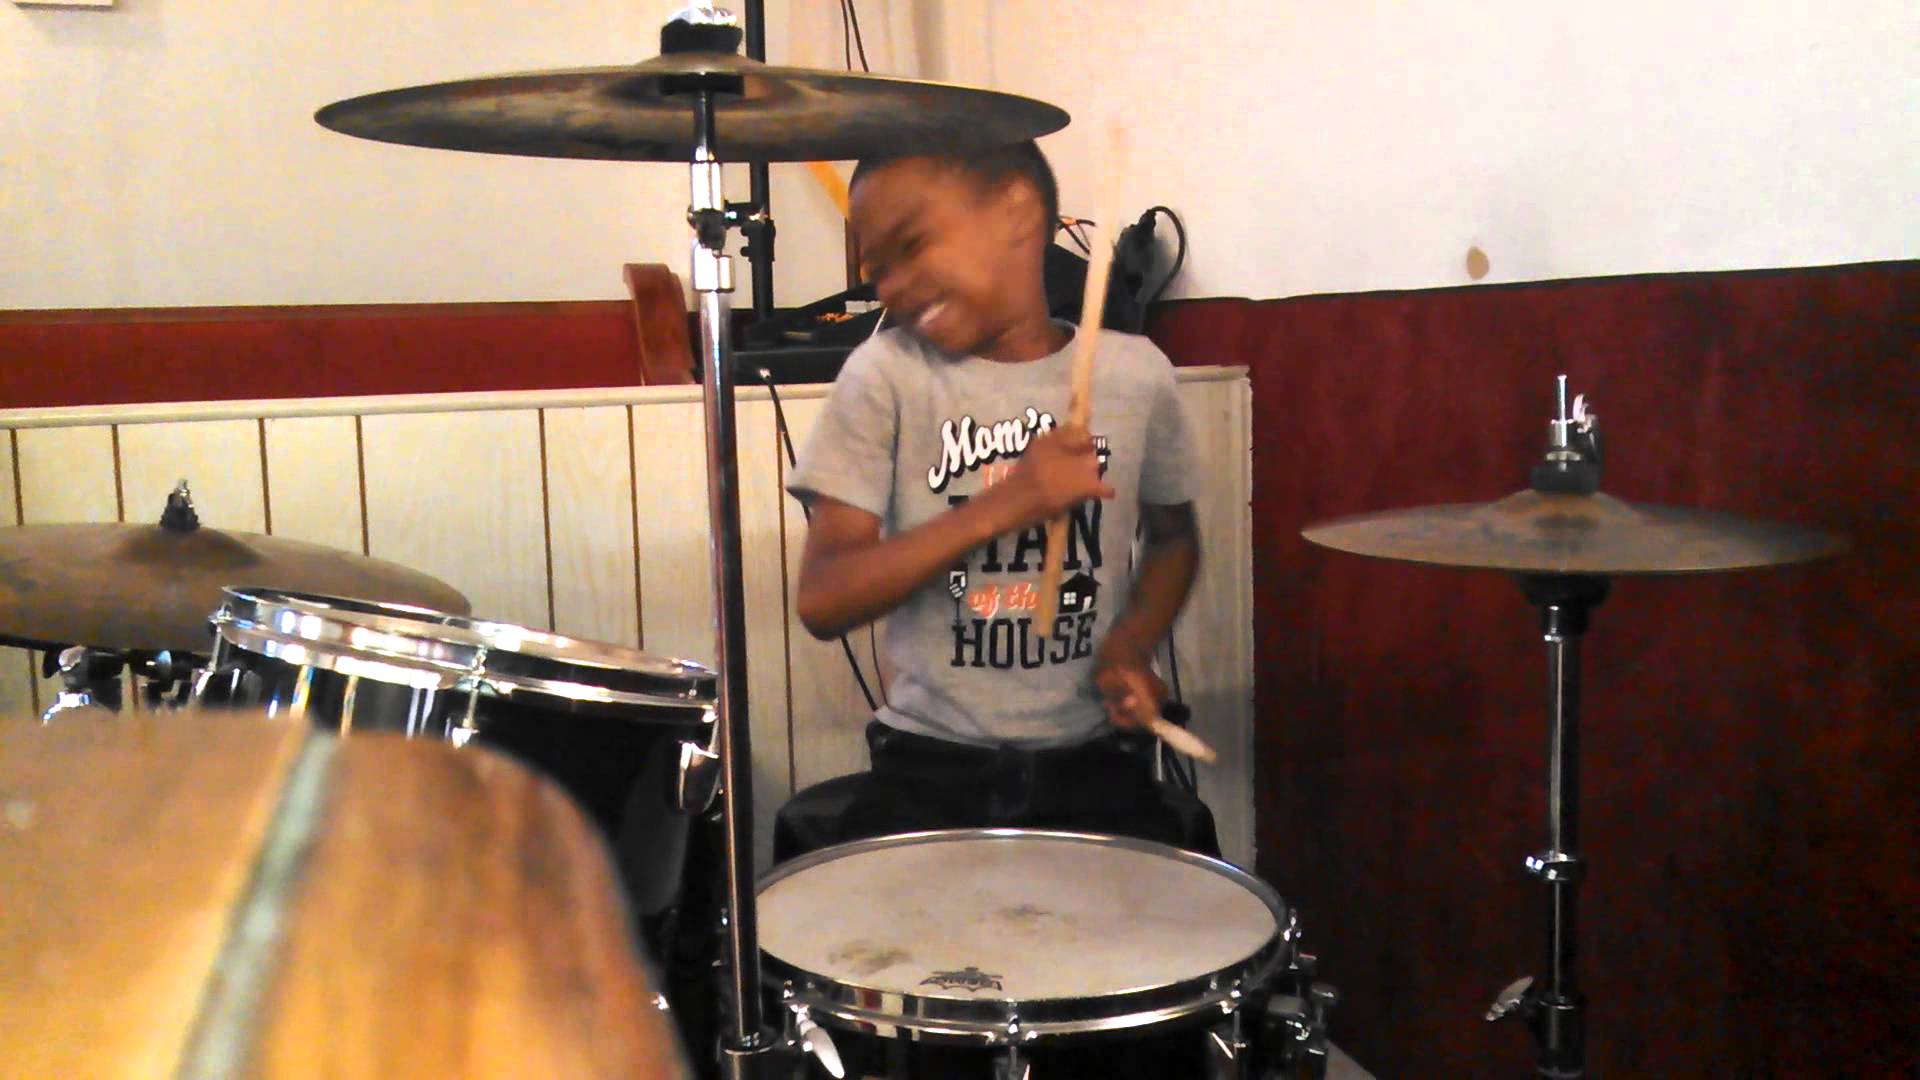 6 YEAR OLD plays drums to Contemporary Gospel song 